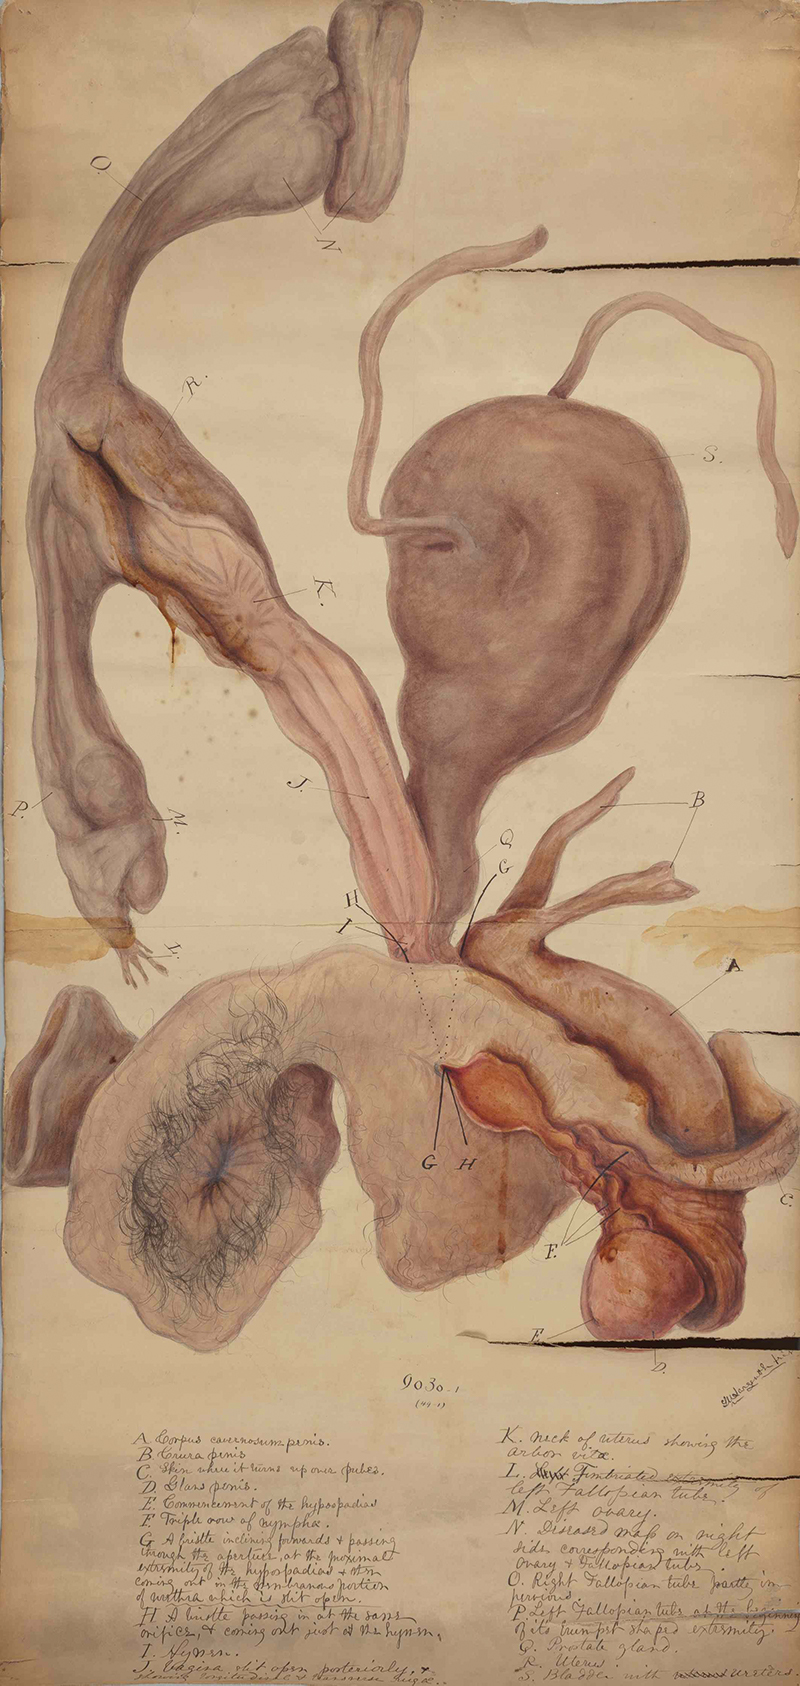 watercolor, circa 1800, of urogenital system of patient Thomas M